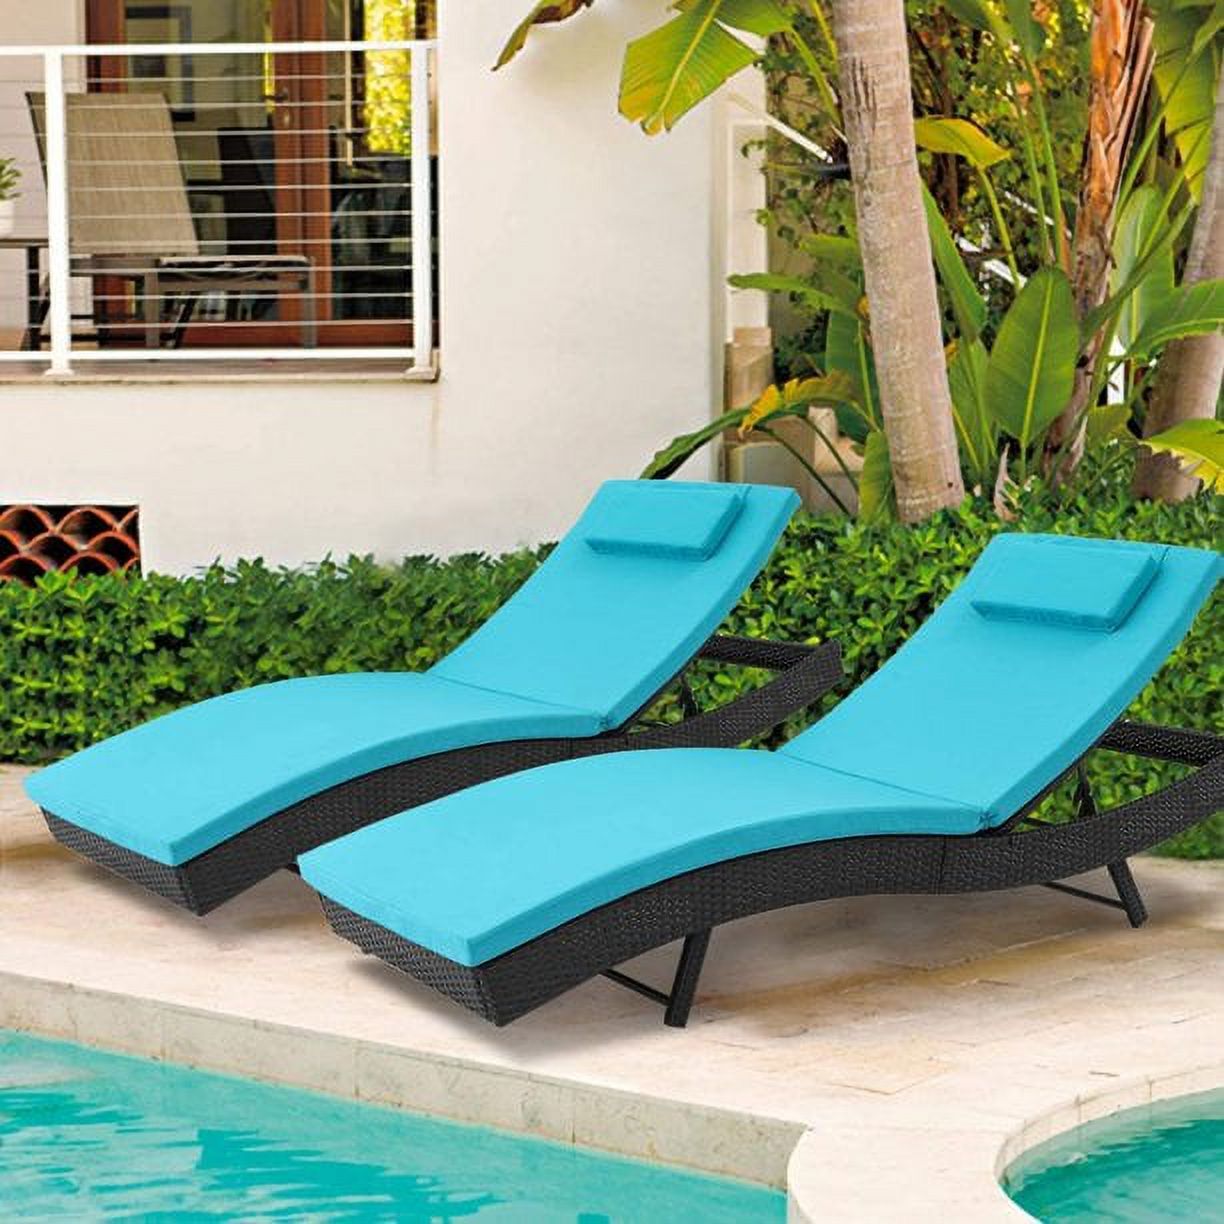 SOLAURA Patio Chaise Lounge Adjustable Black Wicker Reclining Chairs Set of 2 with Blue Cushions - image 1 of 6